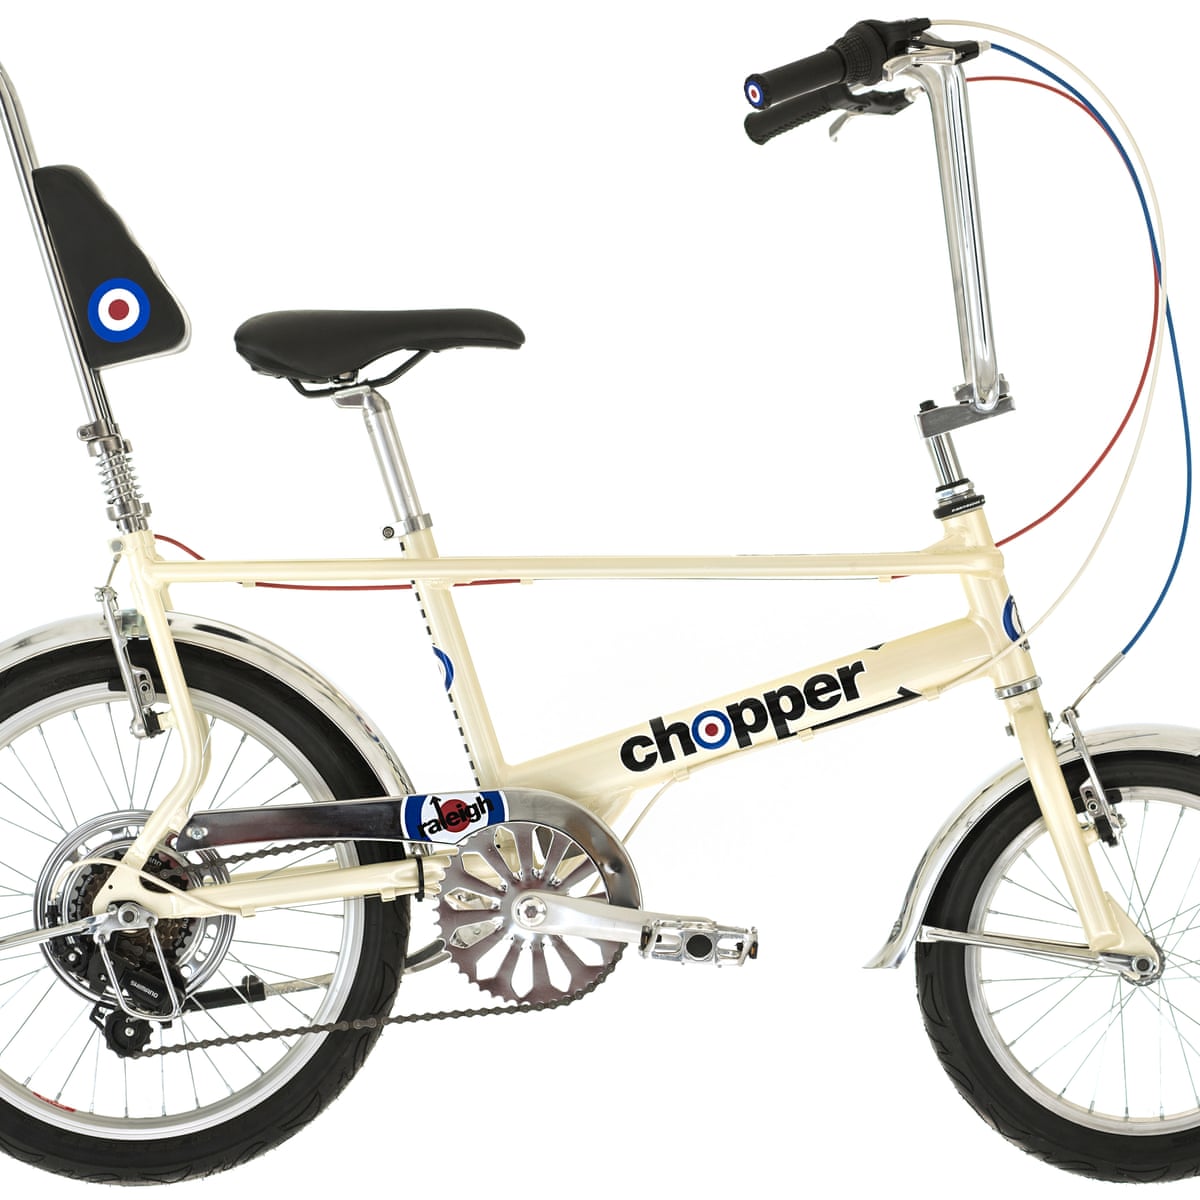 Raleigh Chopper: Bike Review | Life And Style | The Guardian